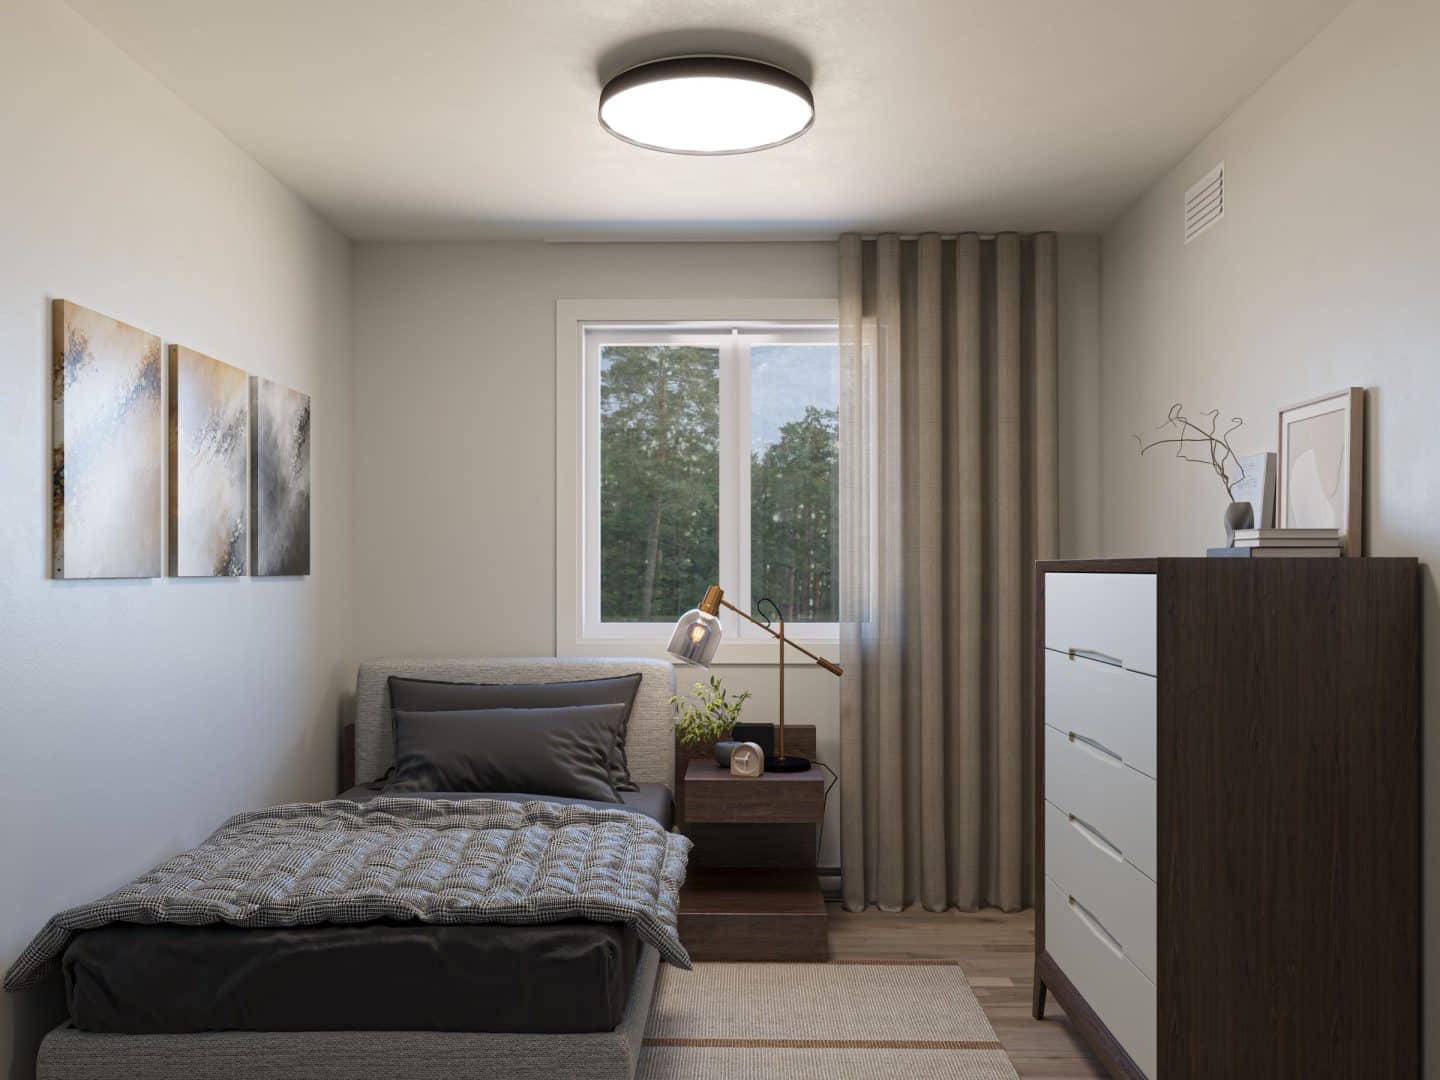 Mignonne model, a single-storey home in the classic style. View of the secondary bedroom.